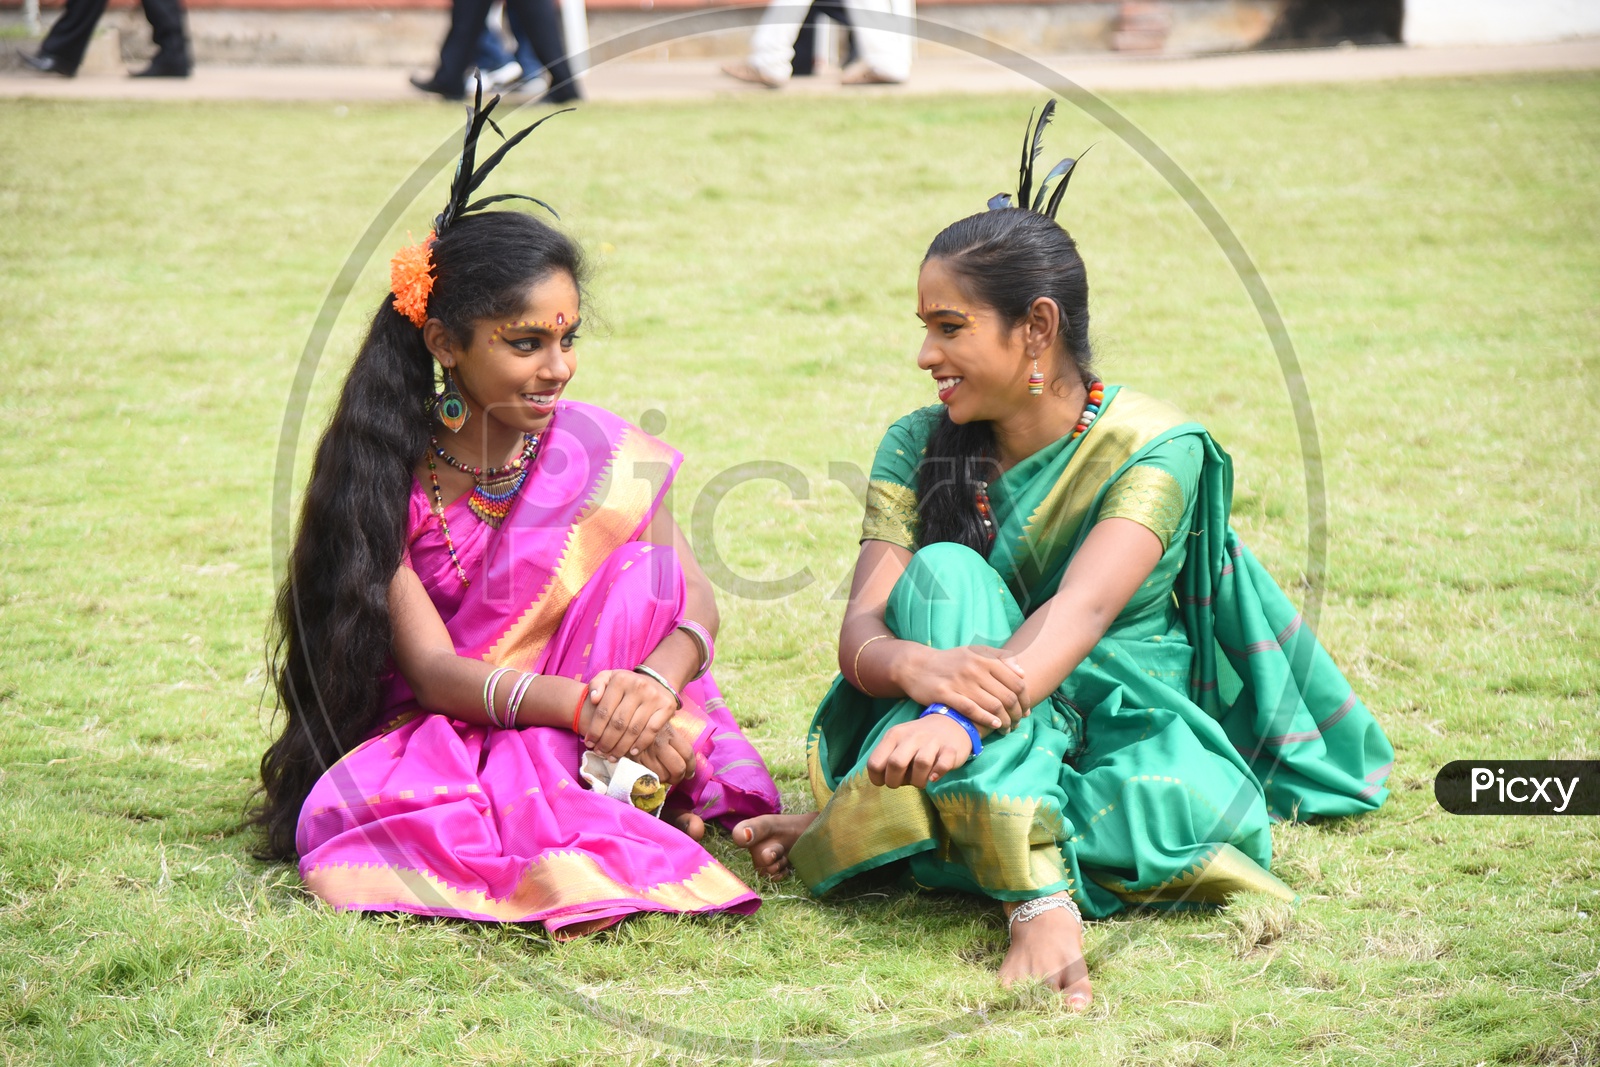 Costumed girls sitting on the lawn